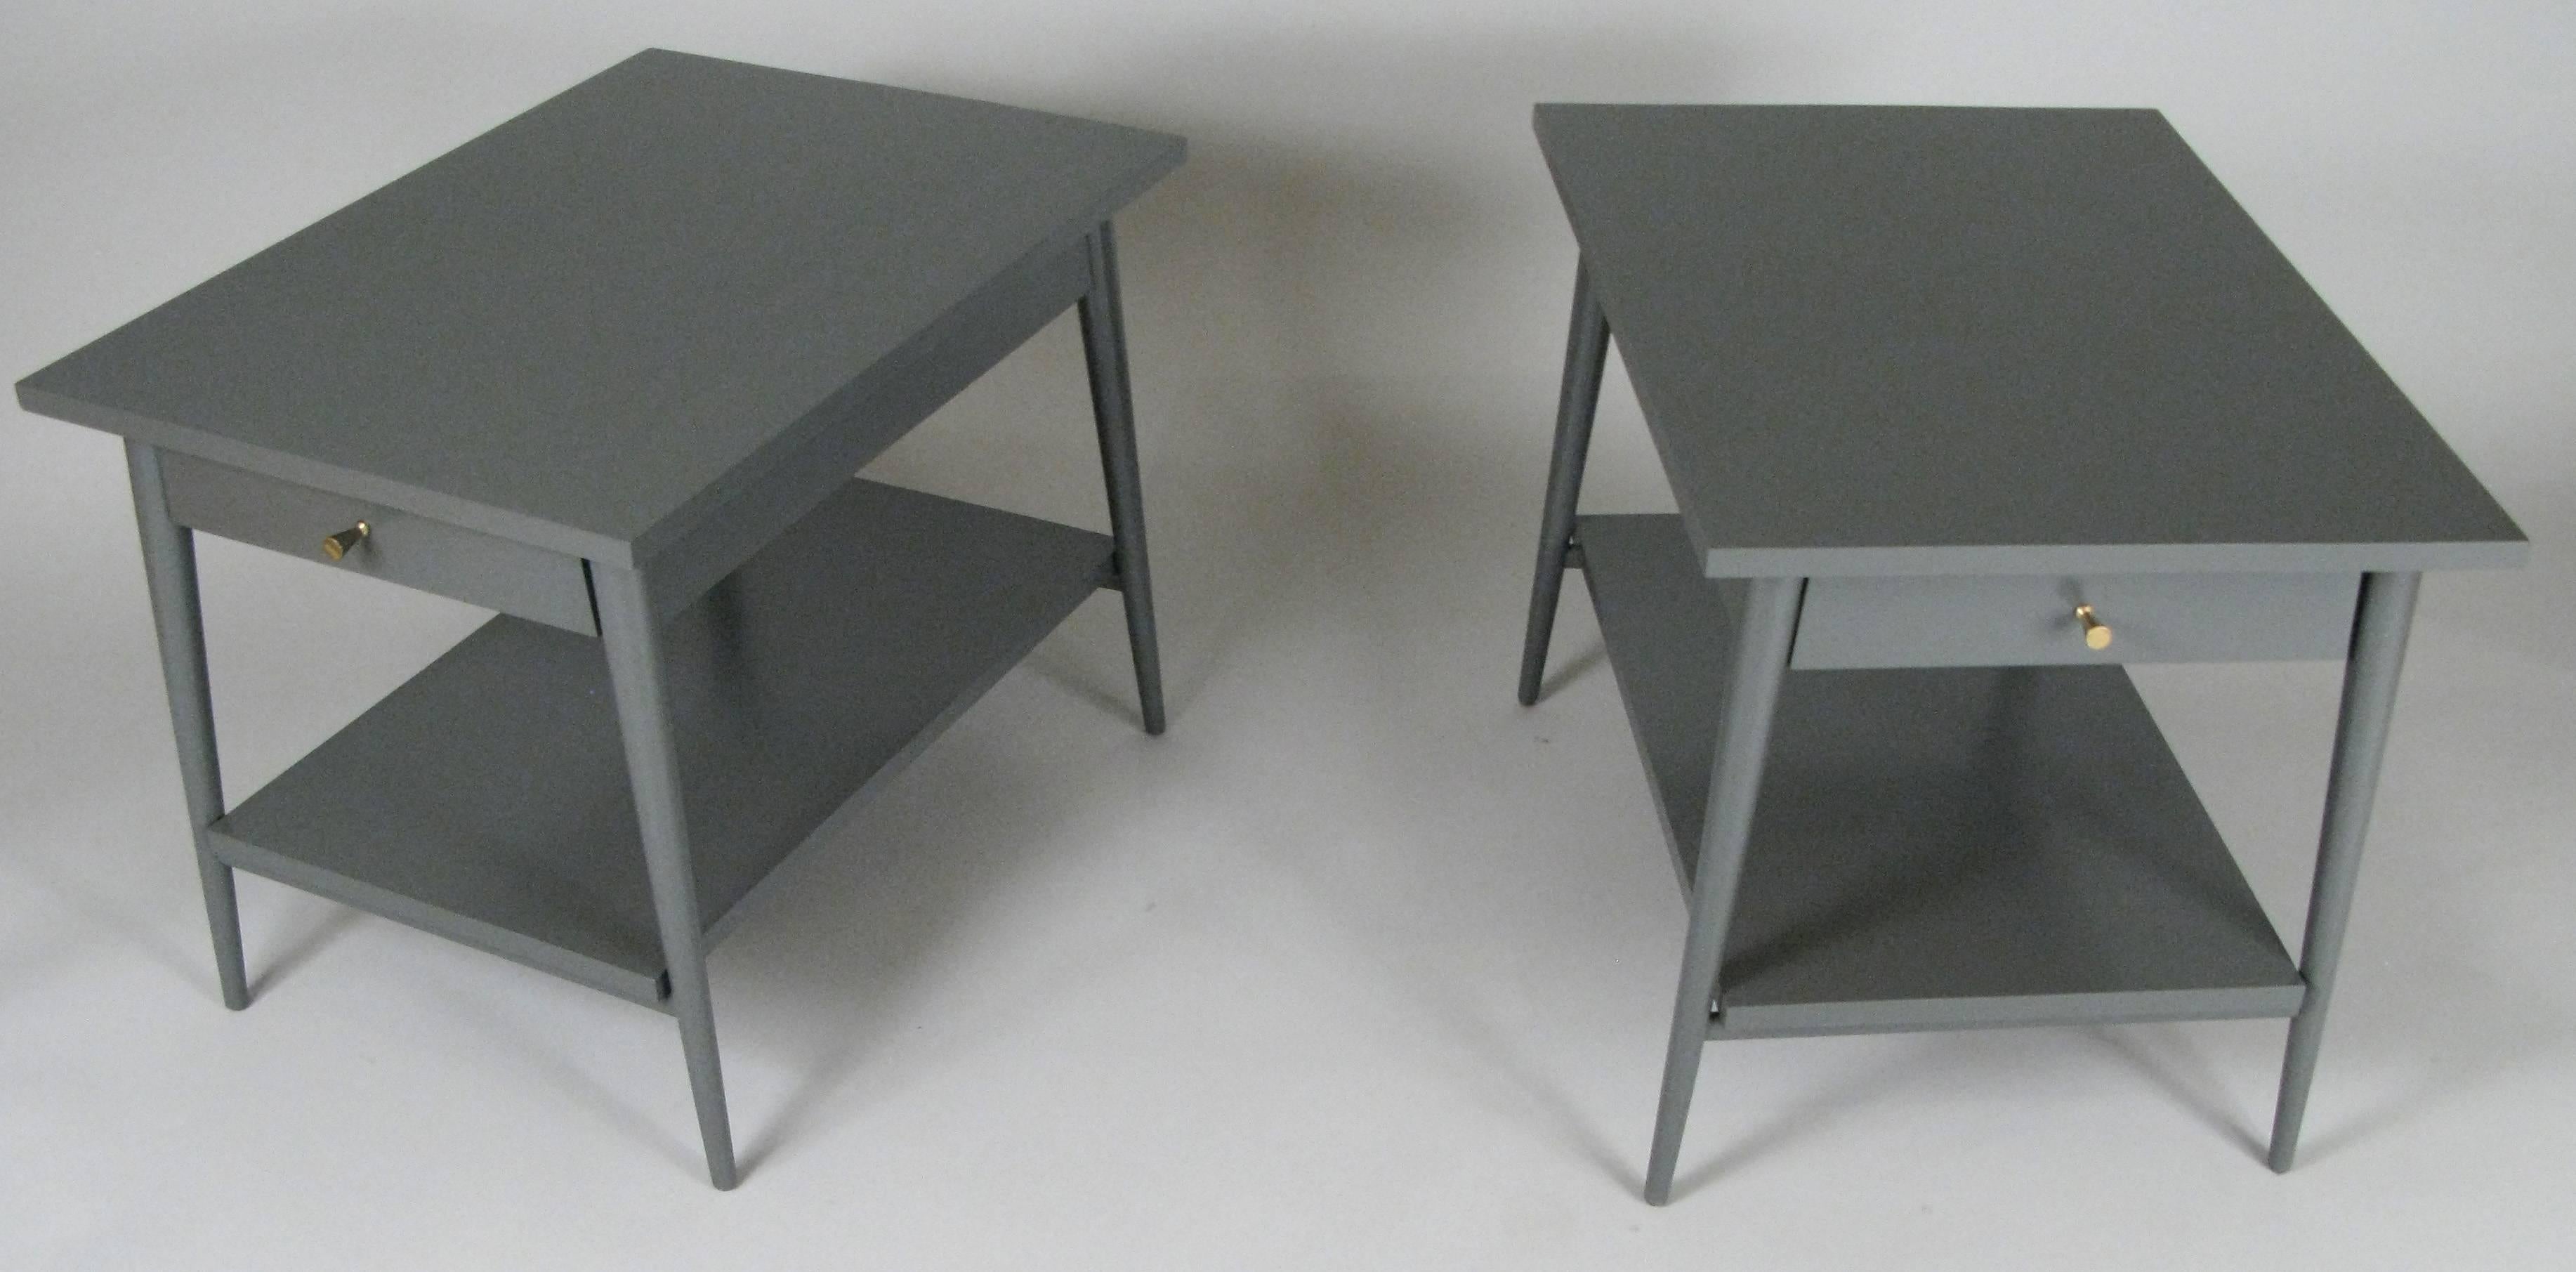 A very handsome pair of vintage 1950s birch nightstands designed by Paul McCobb from his Planner Group series, lacquered in a very nice dark grey color called 'Iron Mountain'. With a single drawer each with McCobb's signature brass cone drawer pull